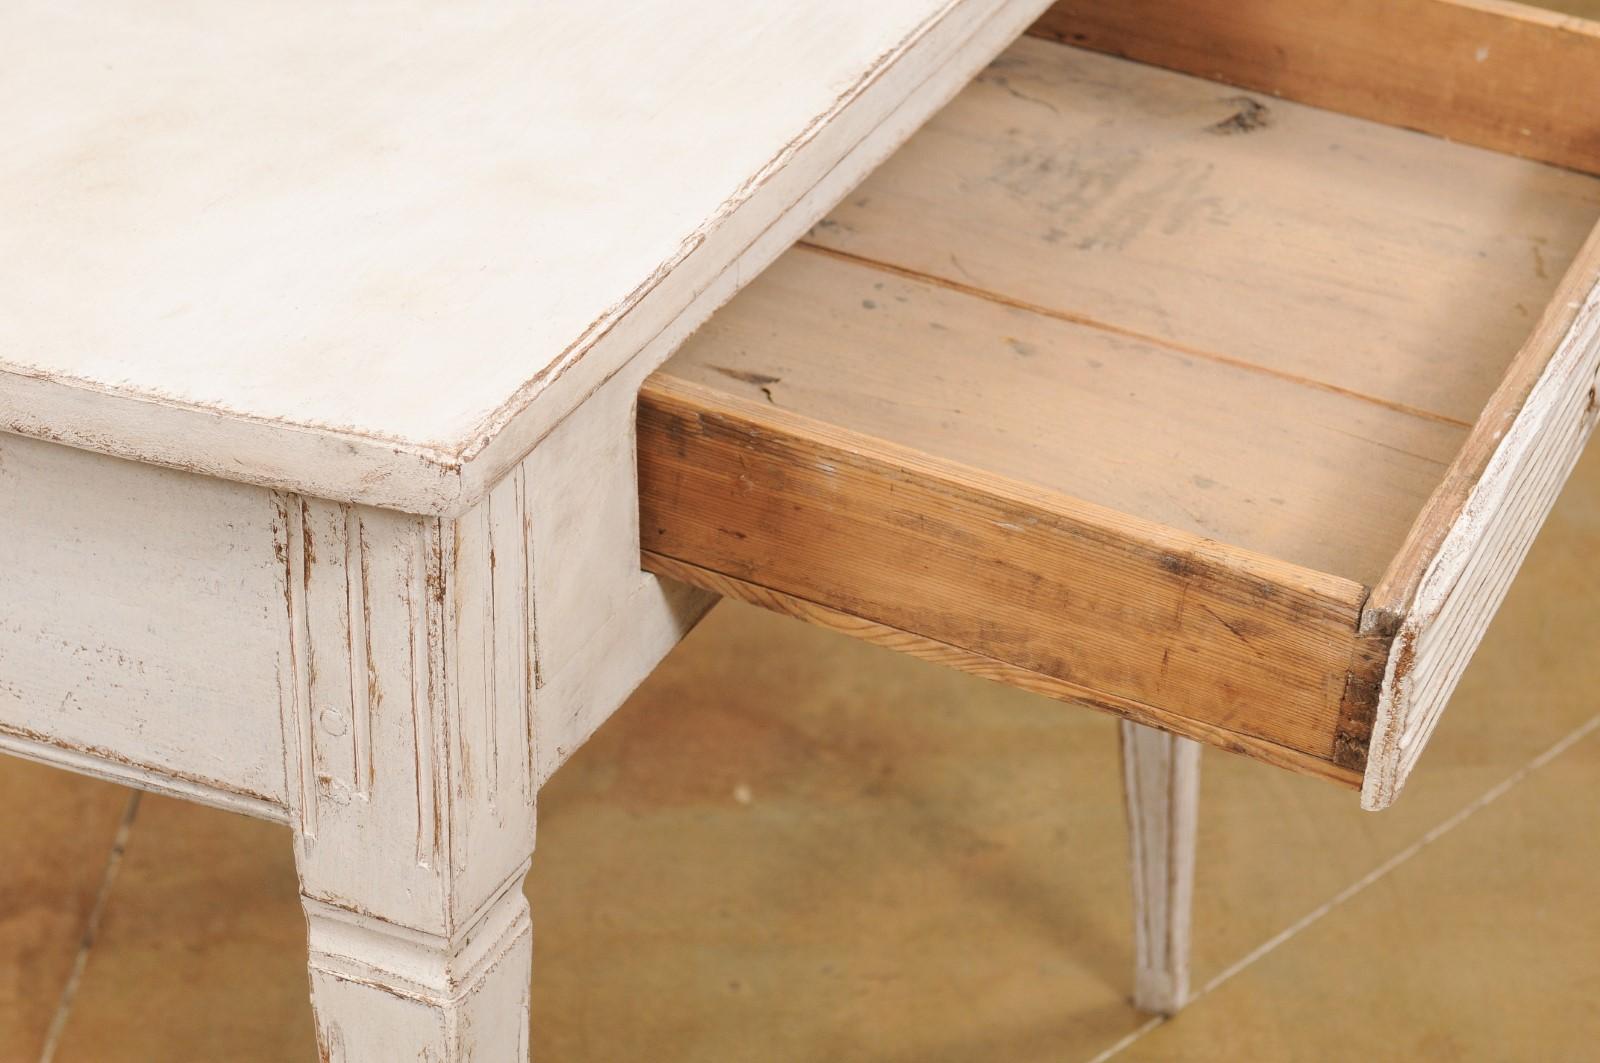 19th Century Swedish Gustavian Style Painted Side Table with Reeded Drawer and Tapered Legs